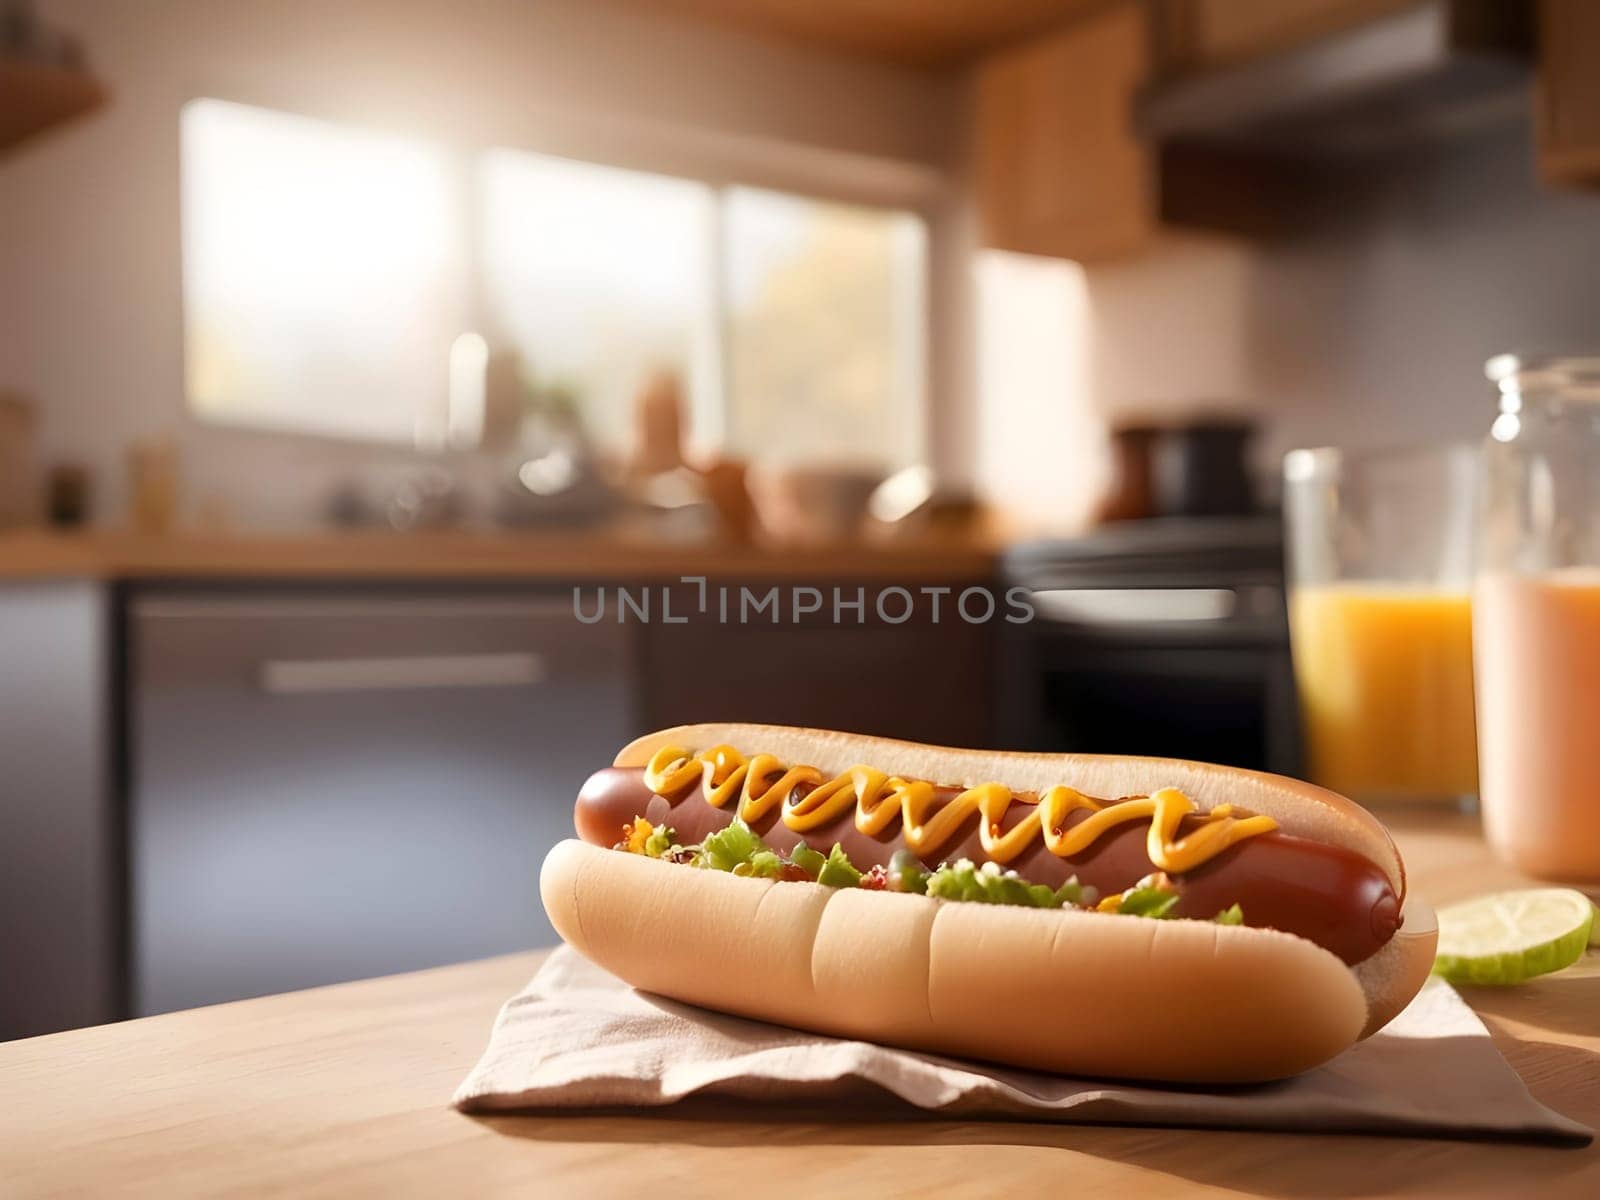 Afternoon Warmth: A Defocused Kitchen Bathed in Light, Framing a Tempting Hot Dog.